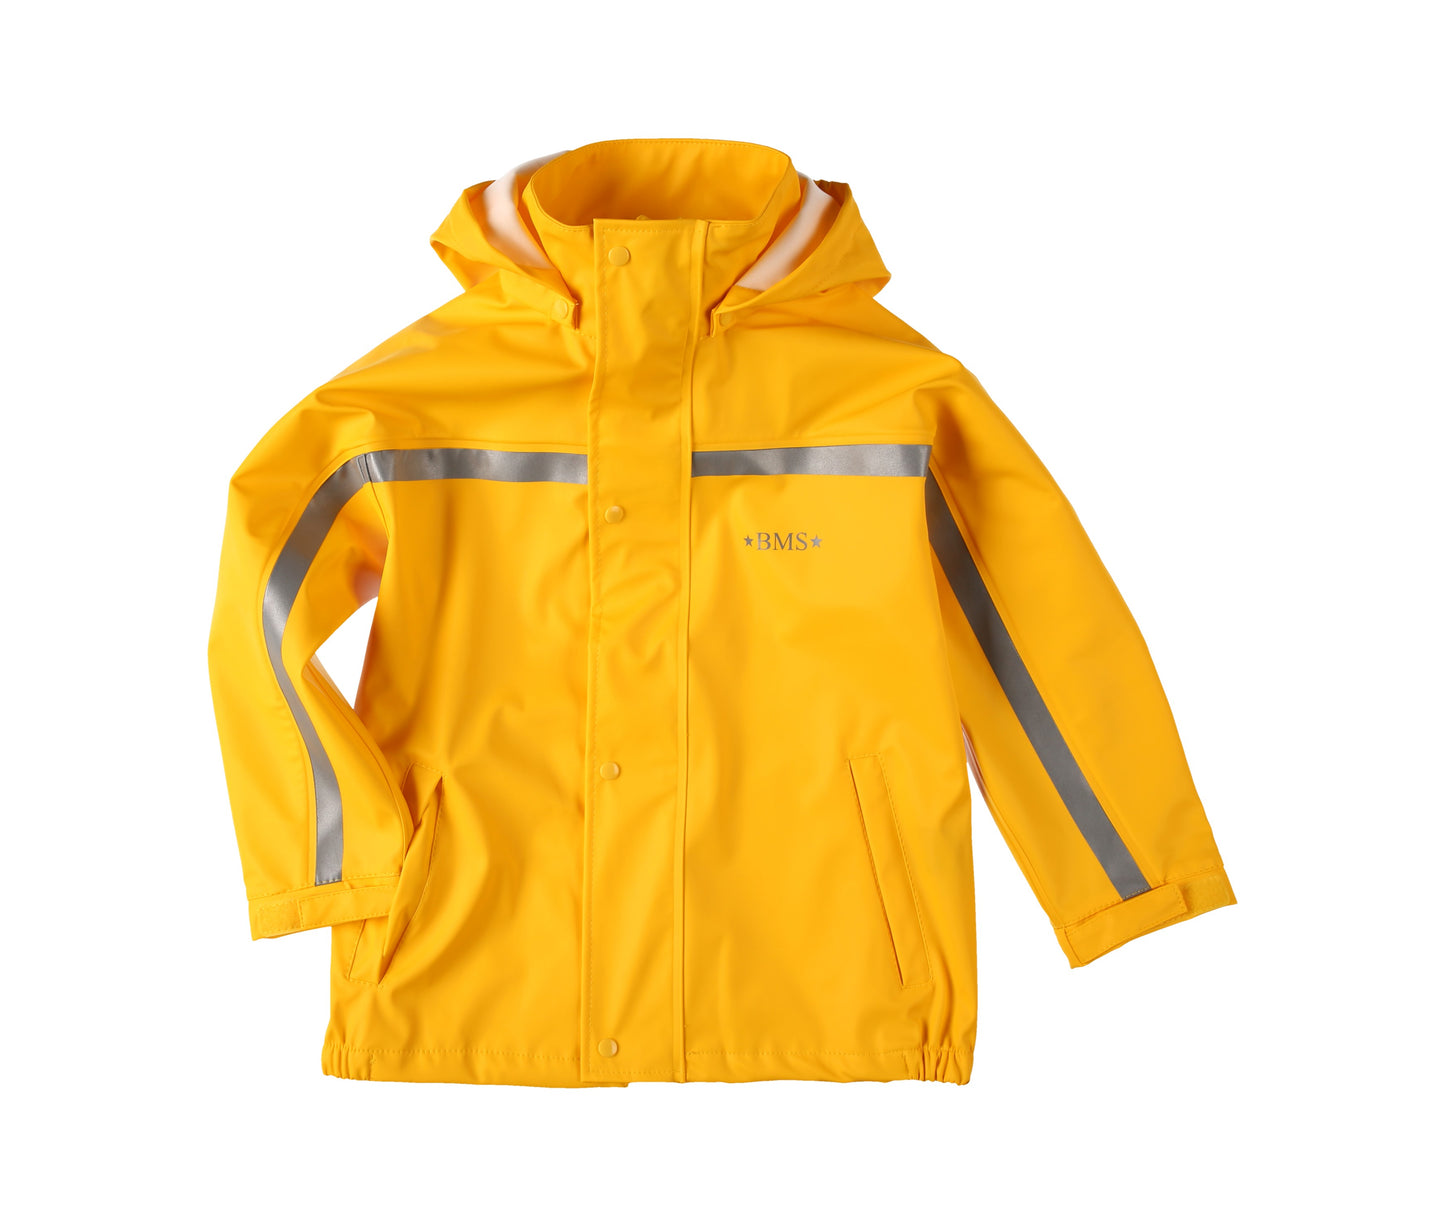 Load image into Gallery viewer, BMS Child Softskin Rain Jacket - SALE - 30% OFF
